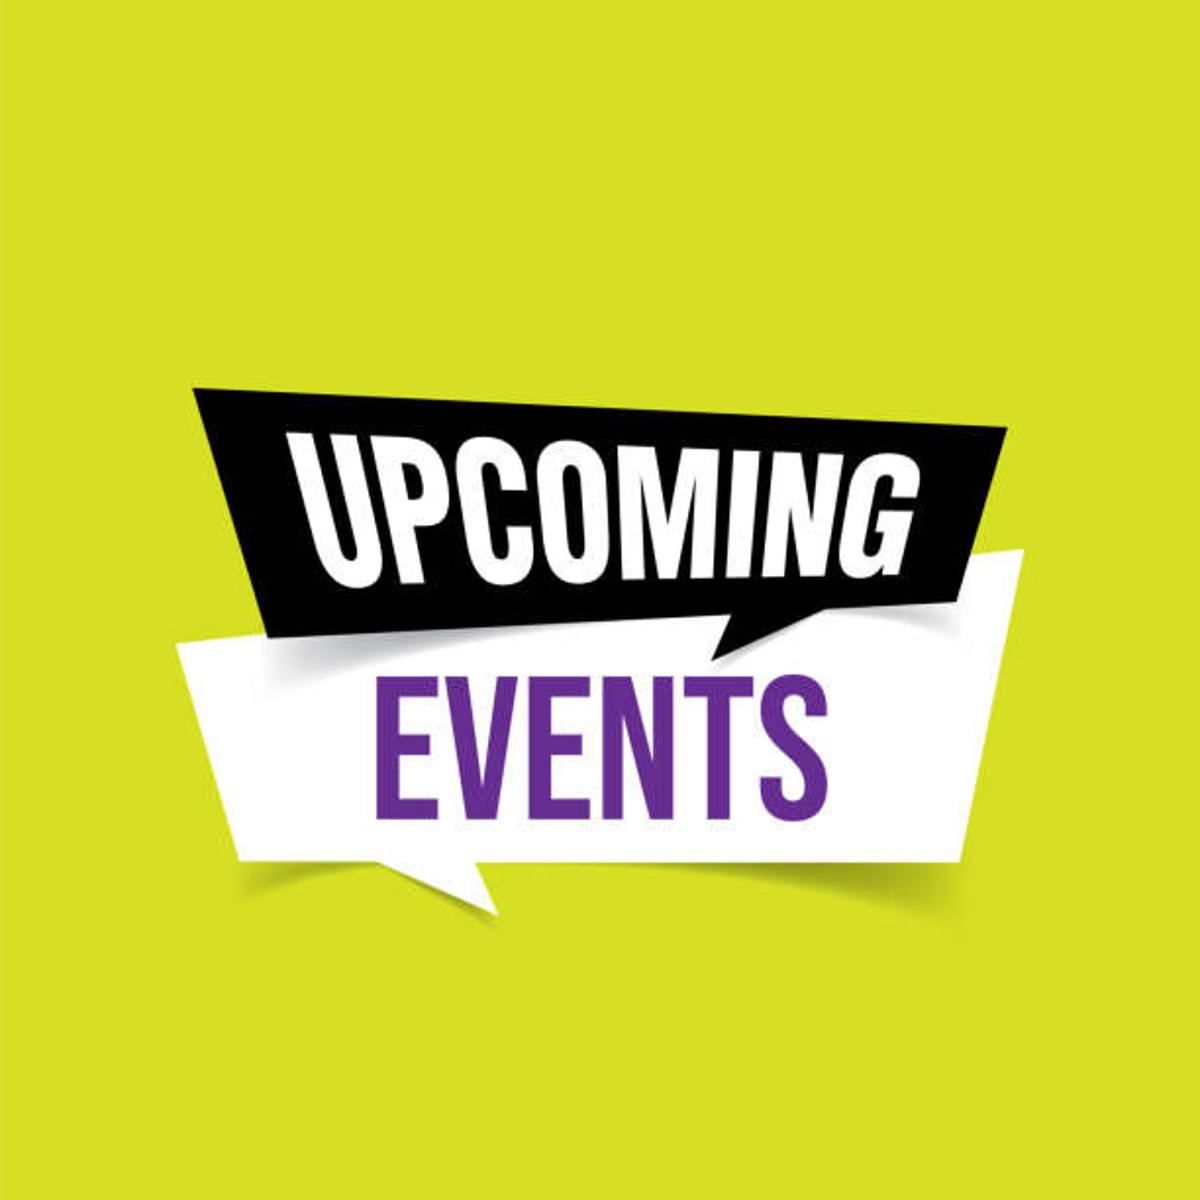 upcoming events logo